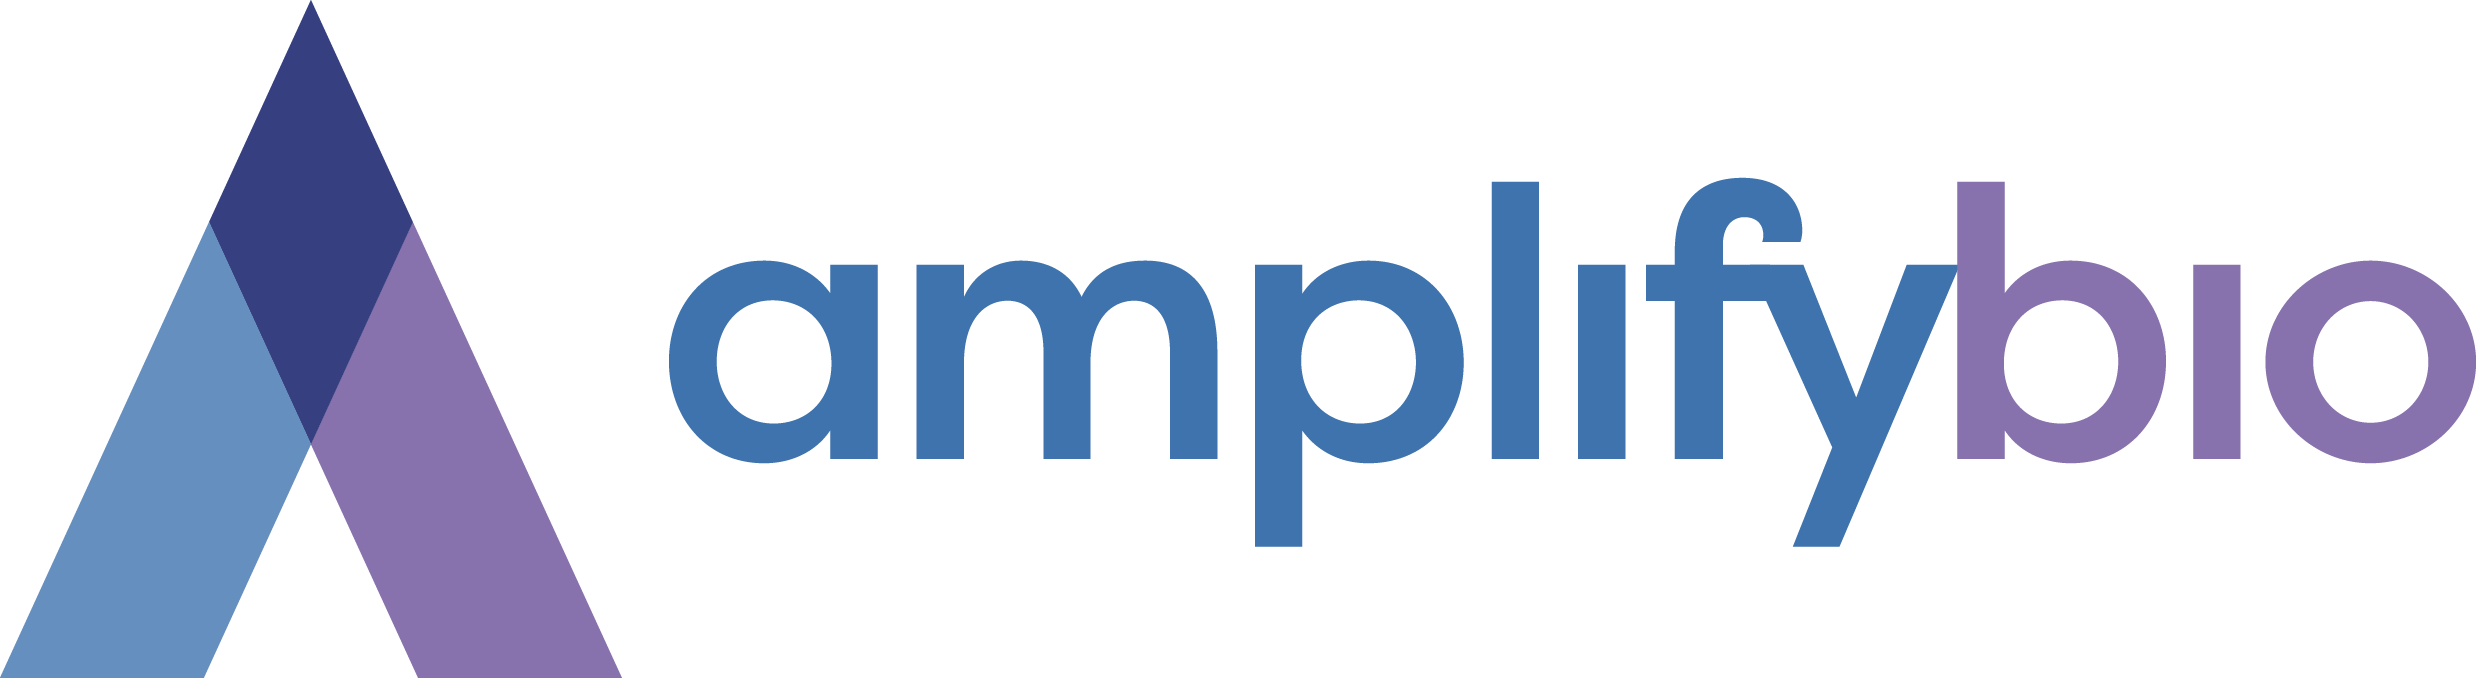 AmplifyBio partners with Canary fintech to offer employee relief funds to support worker well-being